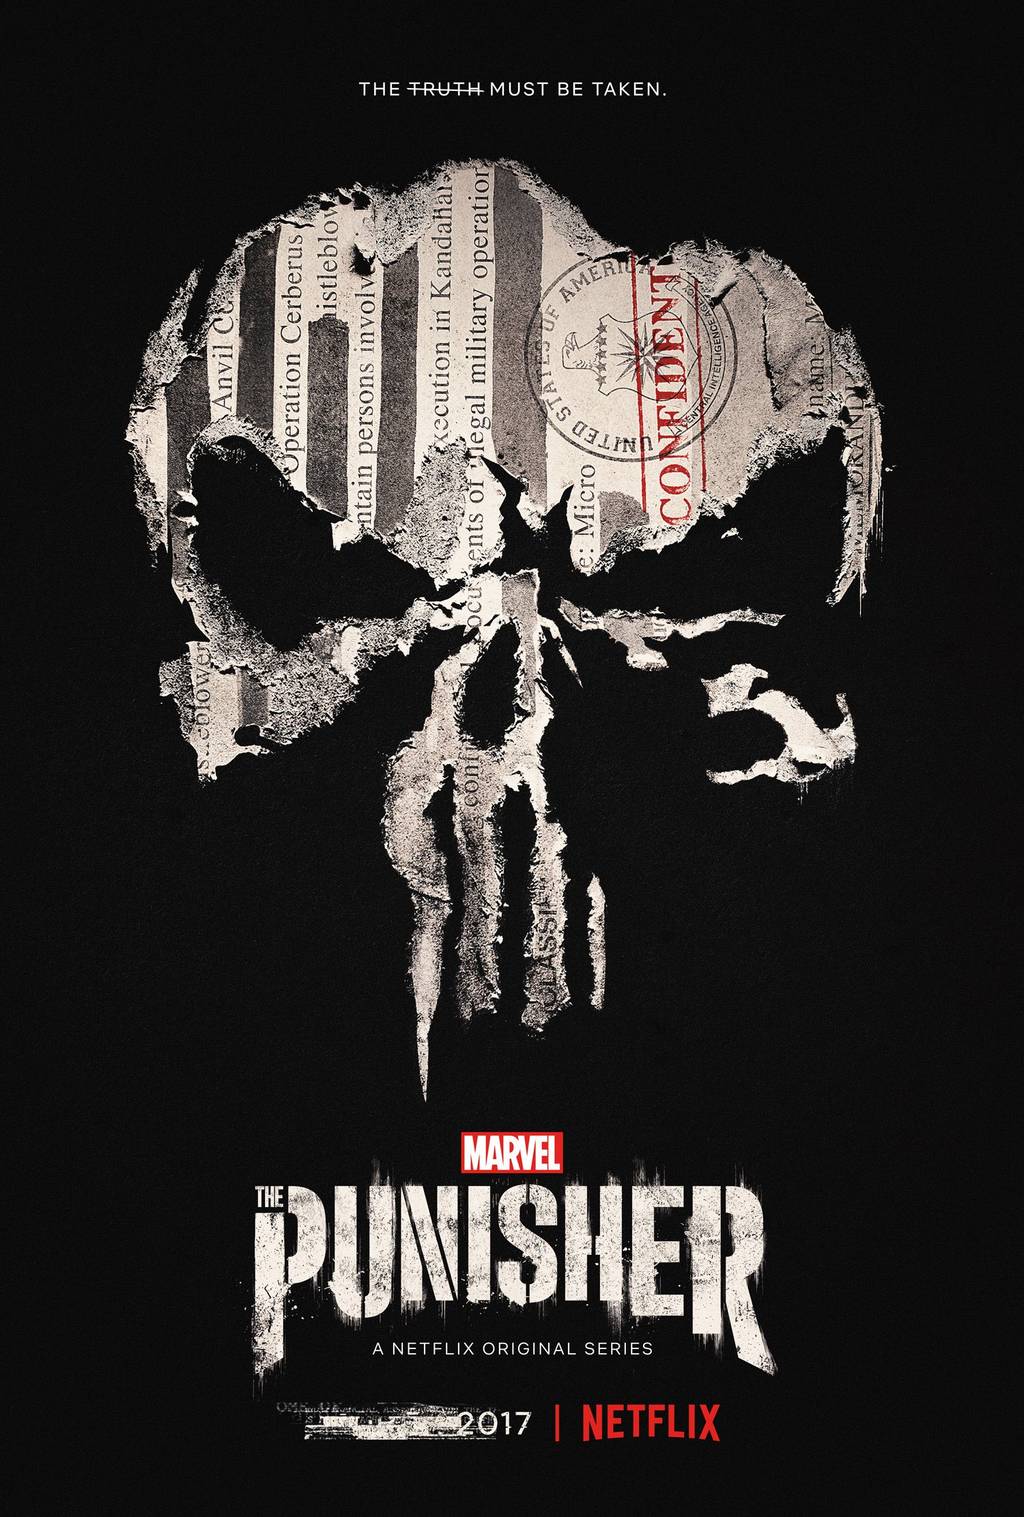 The-Punisher-Poster-Redacted-Release-Date.jpg?q=20&w=1024&h=&fit=crop